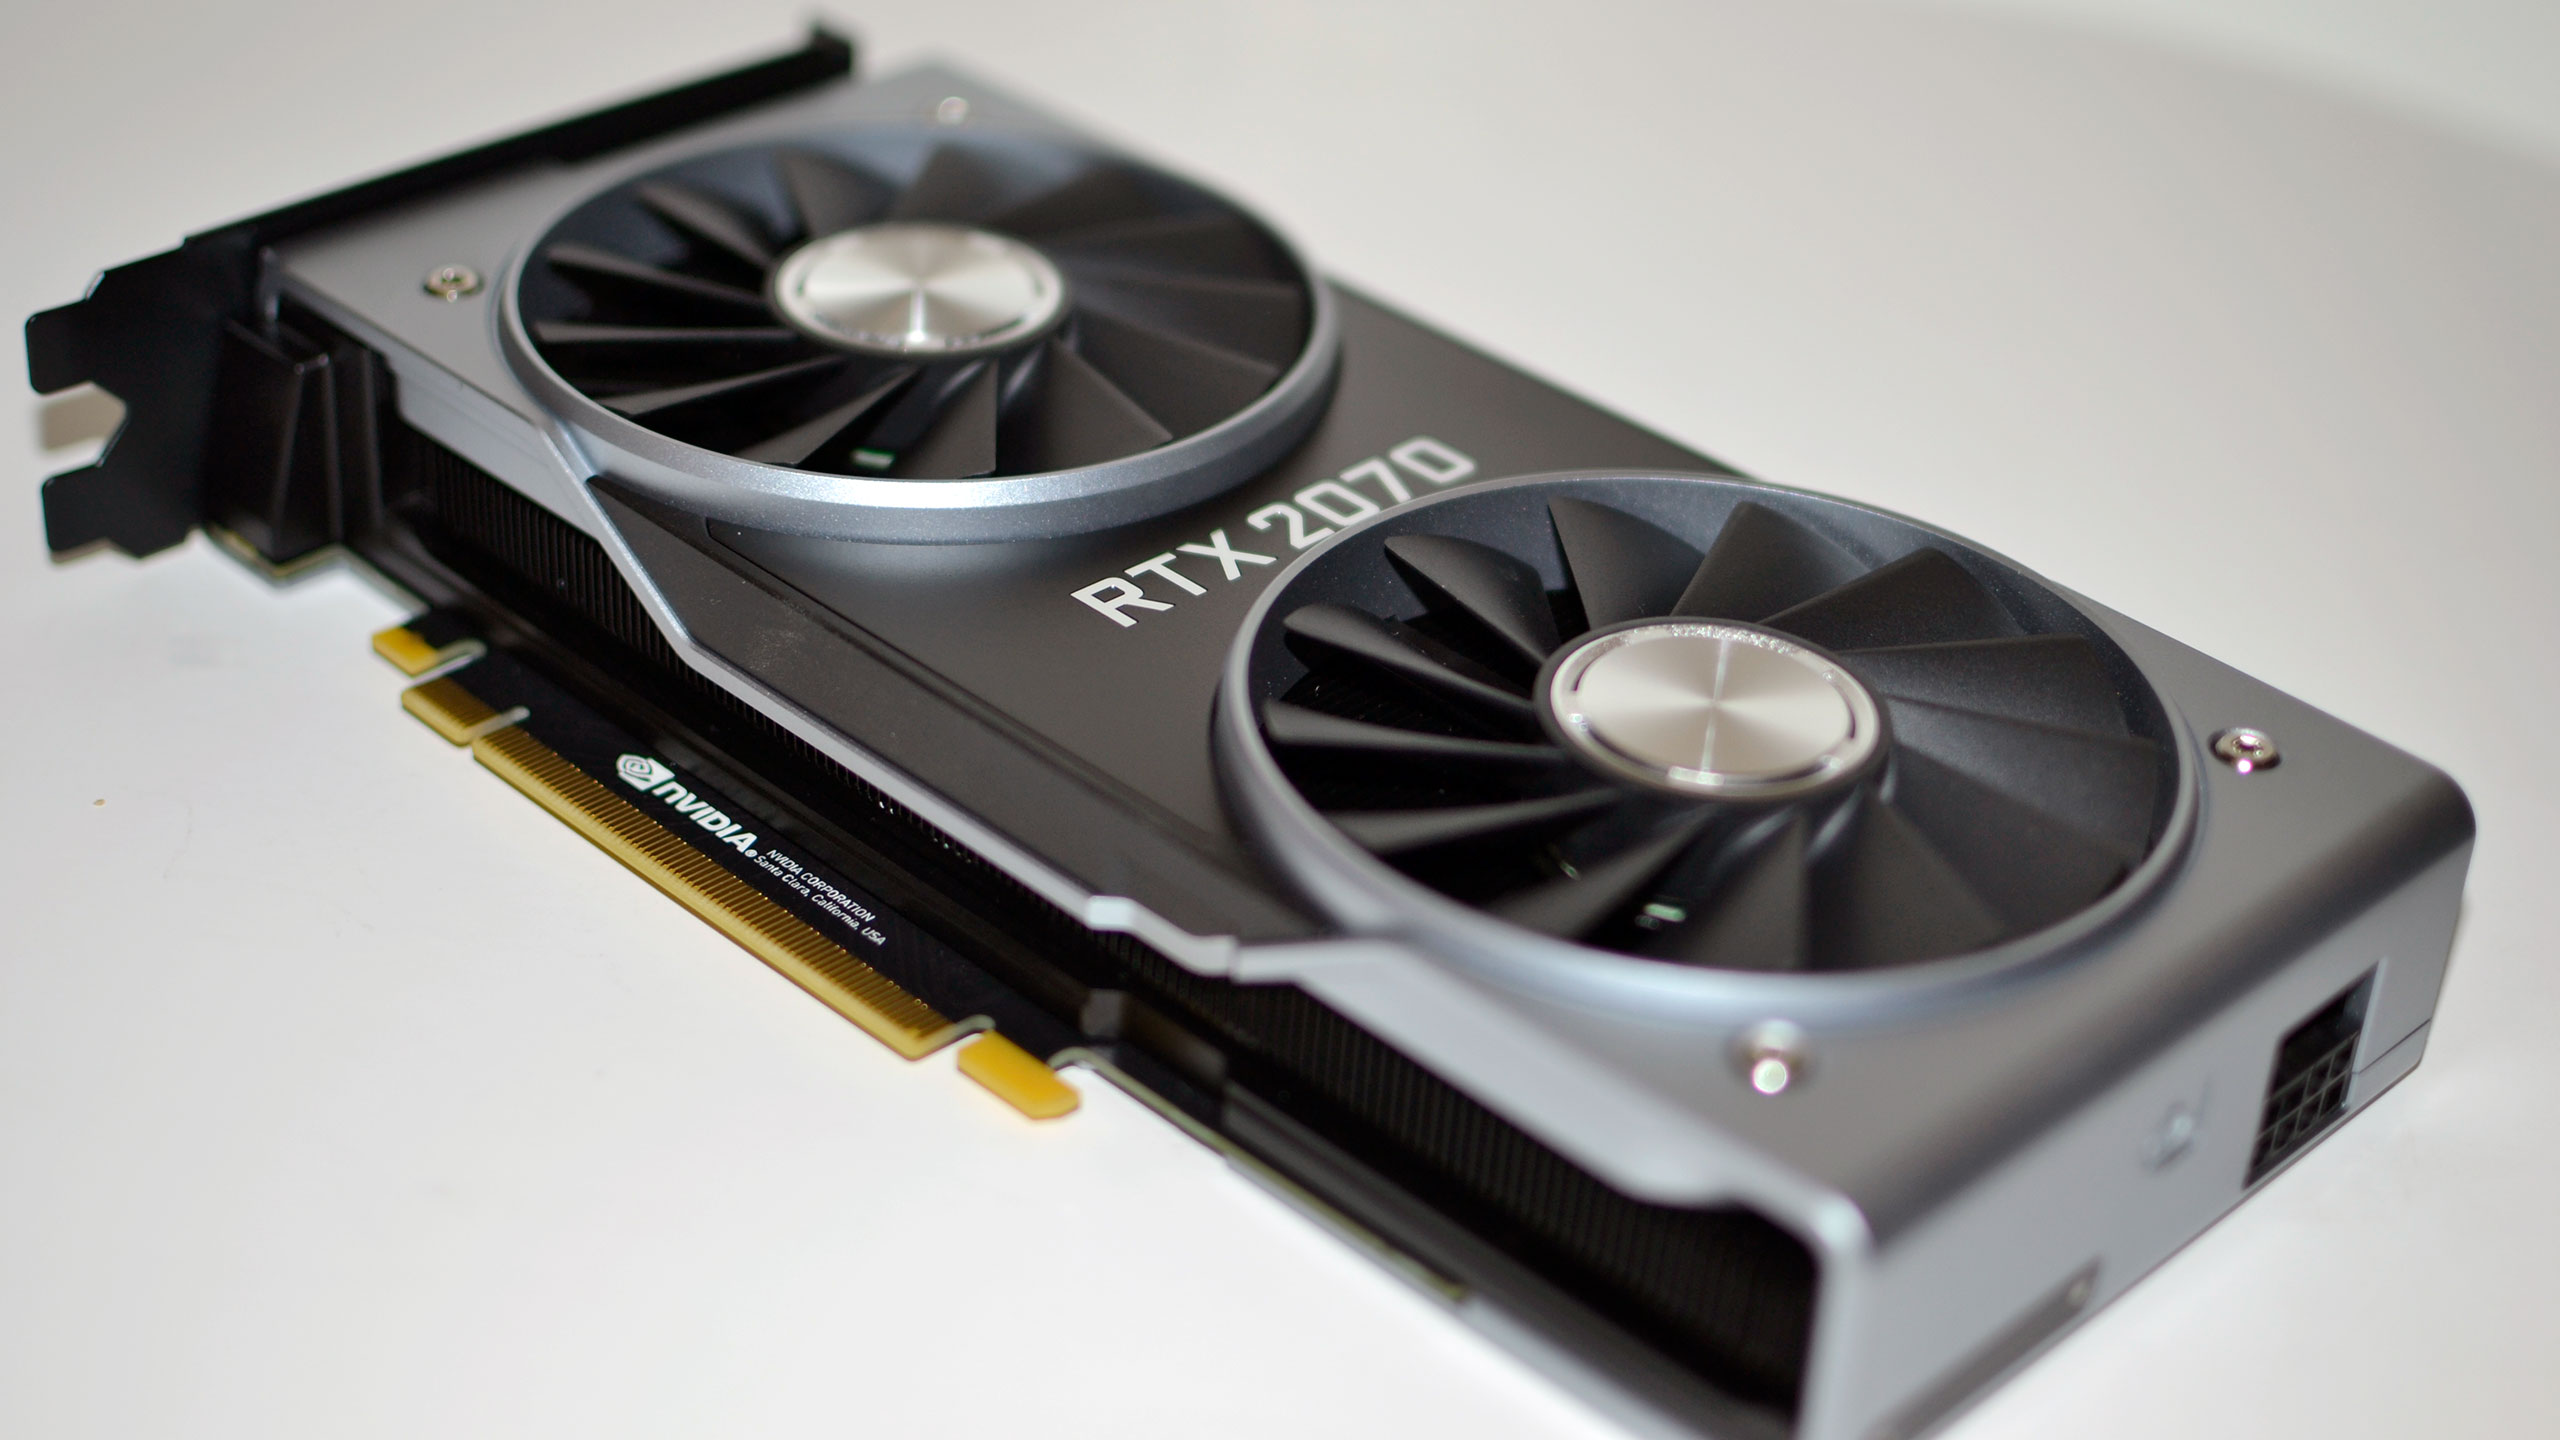 Review — Nvidia GeForce RTX 2070 Founders Edition - Complicated